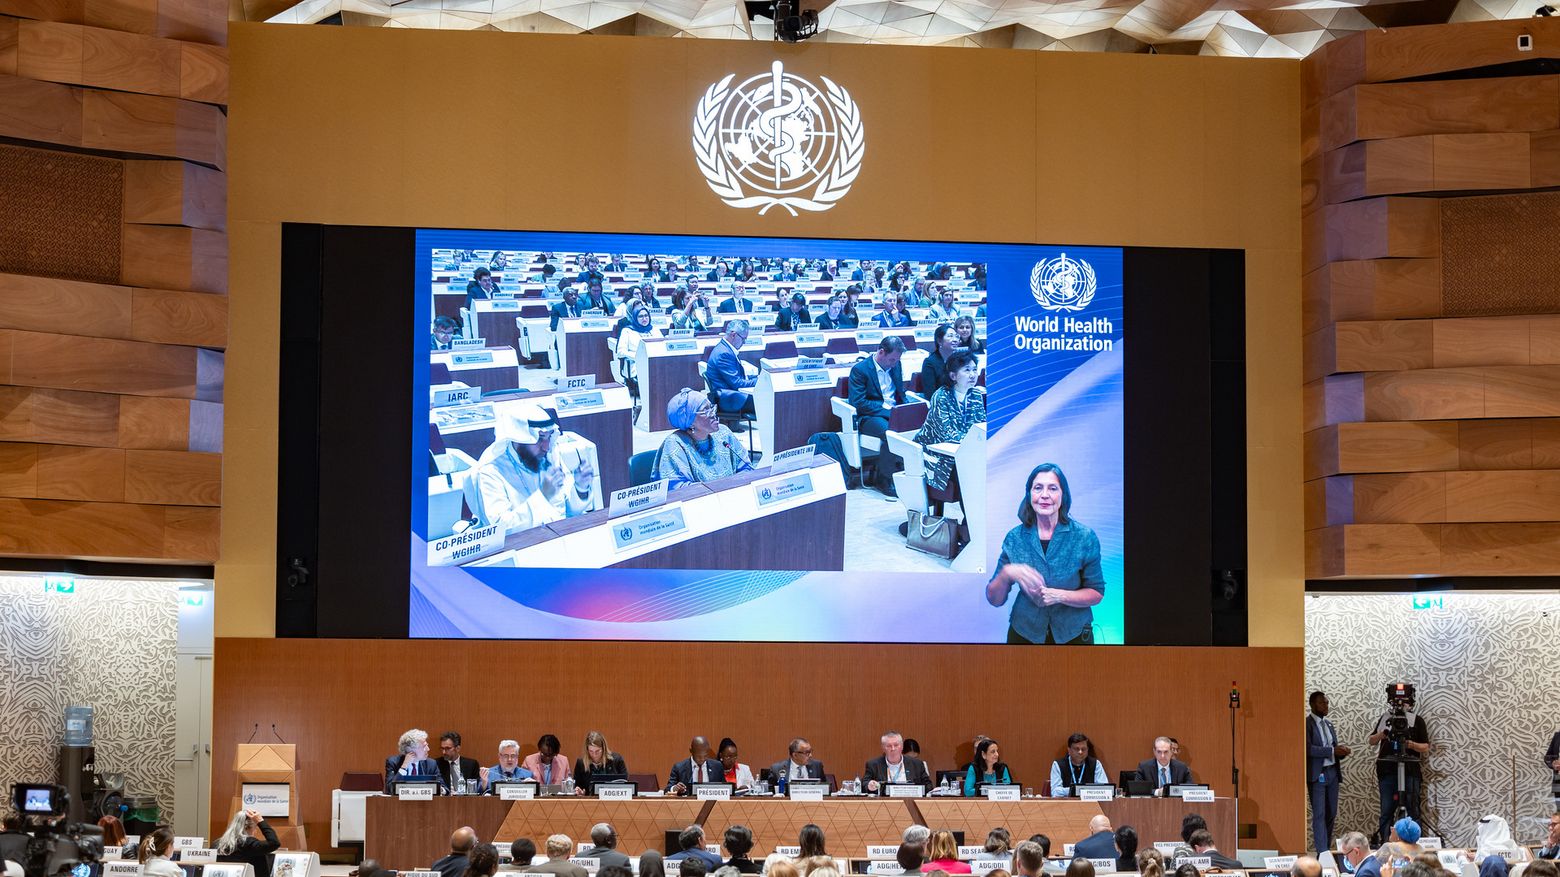 Fourteenth meeting of Committee A on 1 June 2024 at the Palais des Nations in Geneva, Switzerland. The World Health Assembly agreed a package of critical amendments to the International Health Regulations (2005) (IHR), and made concrete commitments to completing negotiations on a global pandemic agreement within a year, at the latest. Related: https://www.who.int/news/item/01-06-2024-world-health-assembly-agreement-reached-on-wide-ranging--decisive-package-of-amendments-to-improve-the-international-health-regulations--and-sets-date-for-finalizing-negotiations-on-a-proposed-pandemic-agreement  